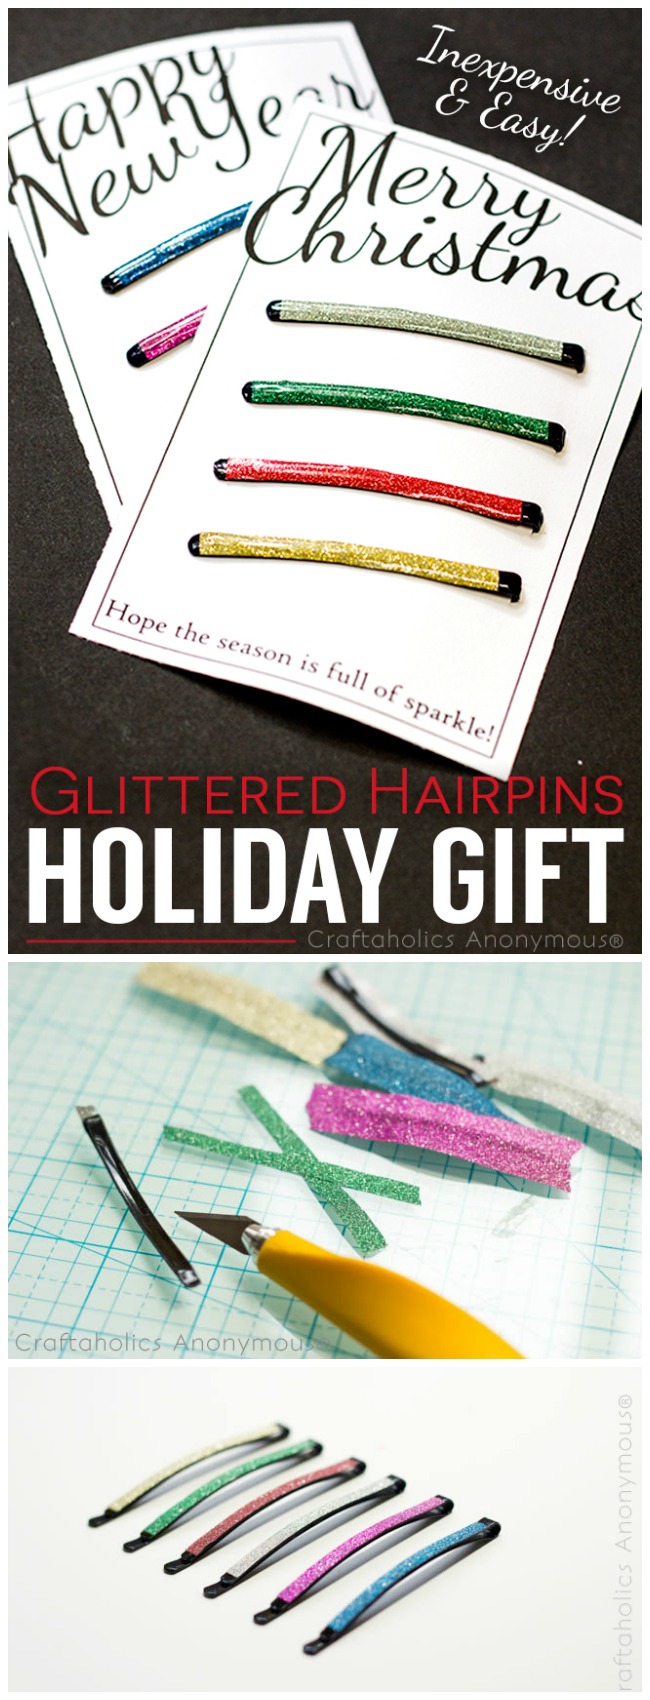 DIY glitter hairpins | Handmade gift idea | Great Christmas gift for girls to make for their friends!